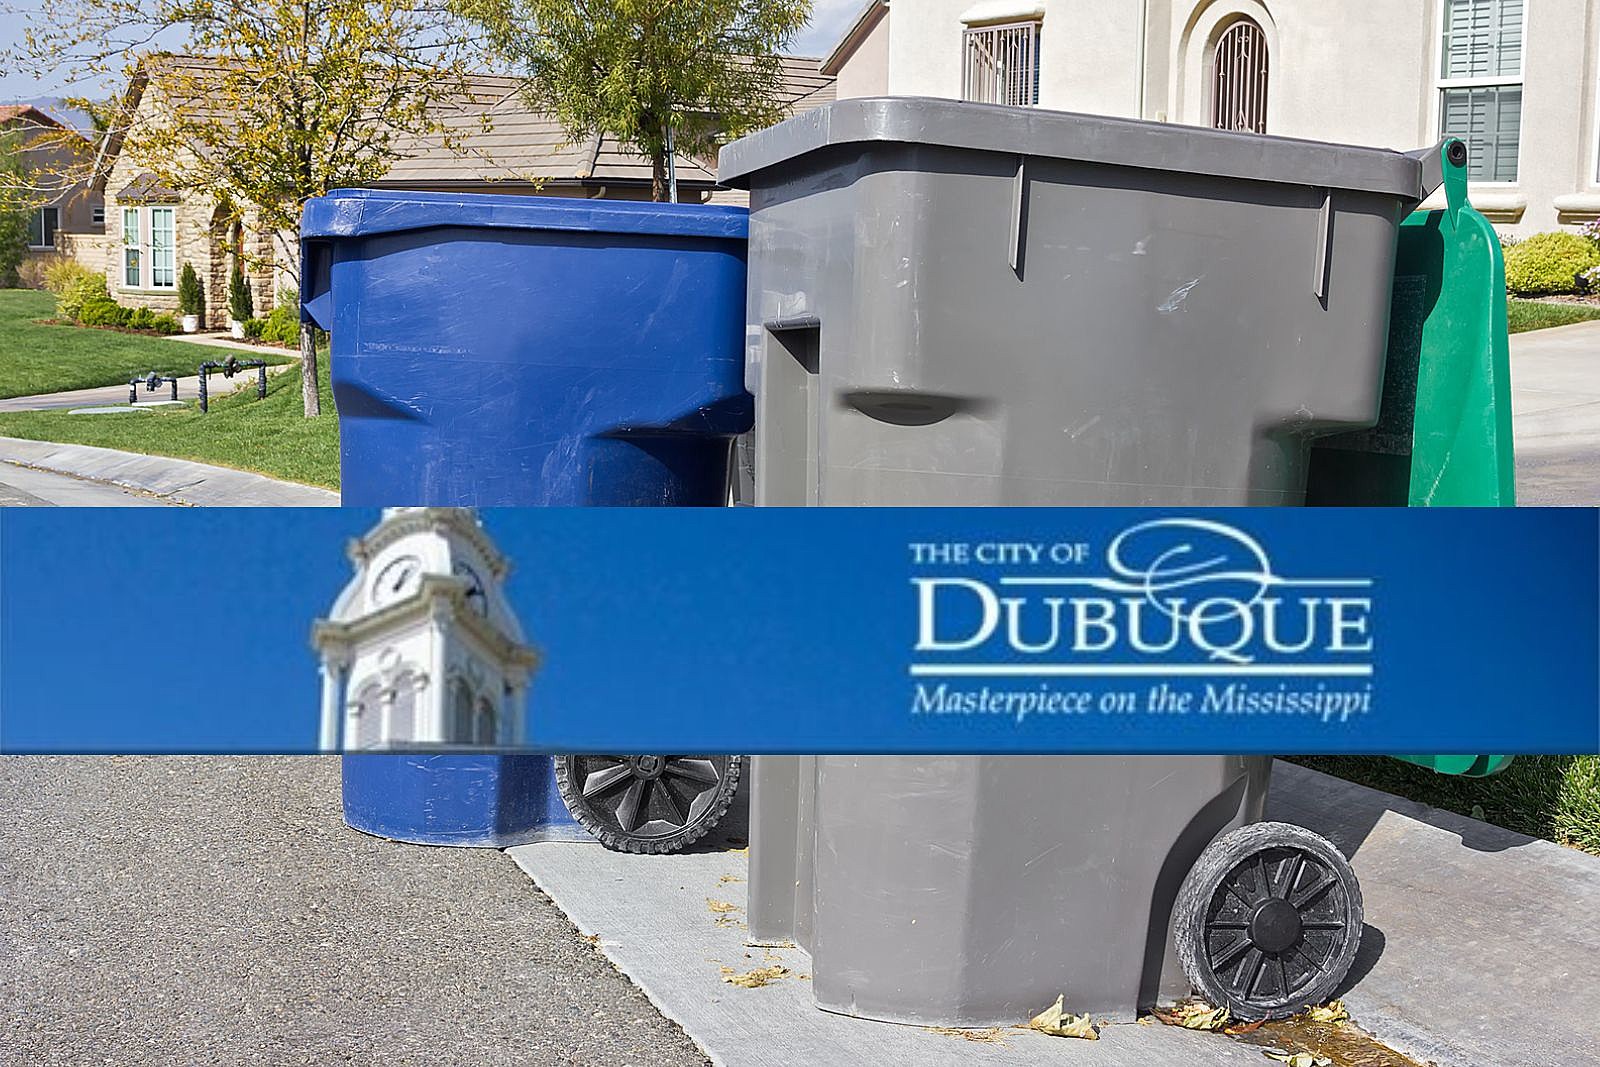 As you're collecting yard waste, we - City of Perrysburg